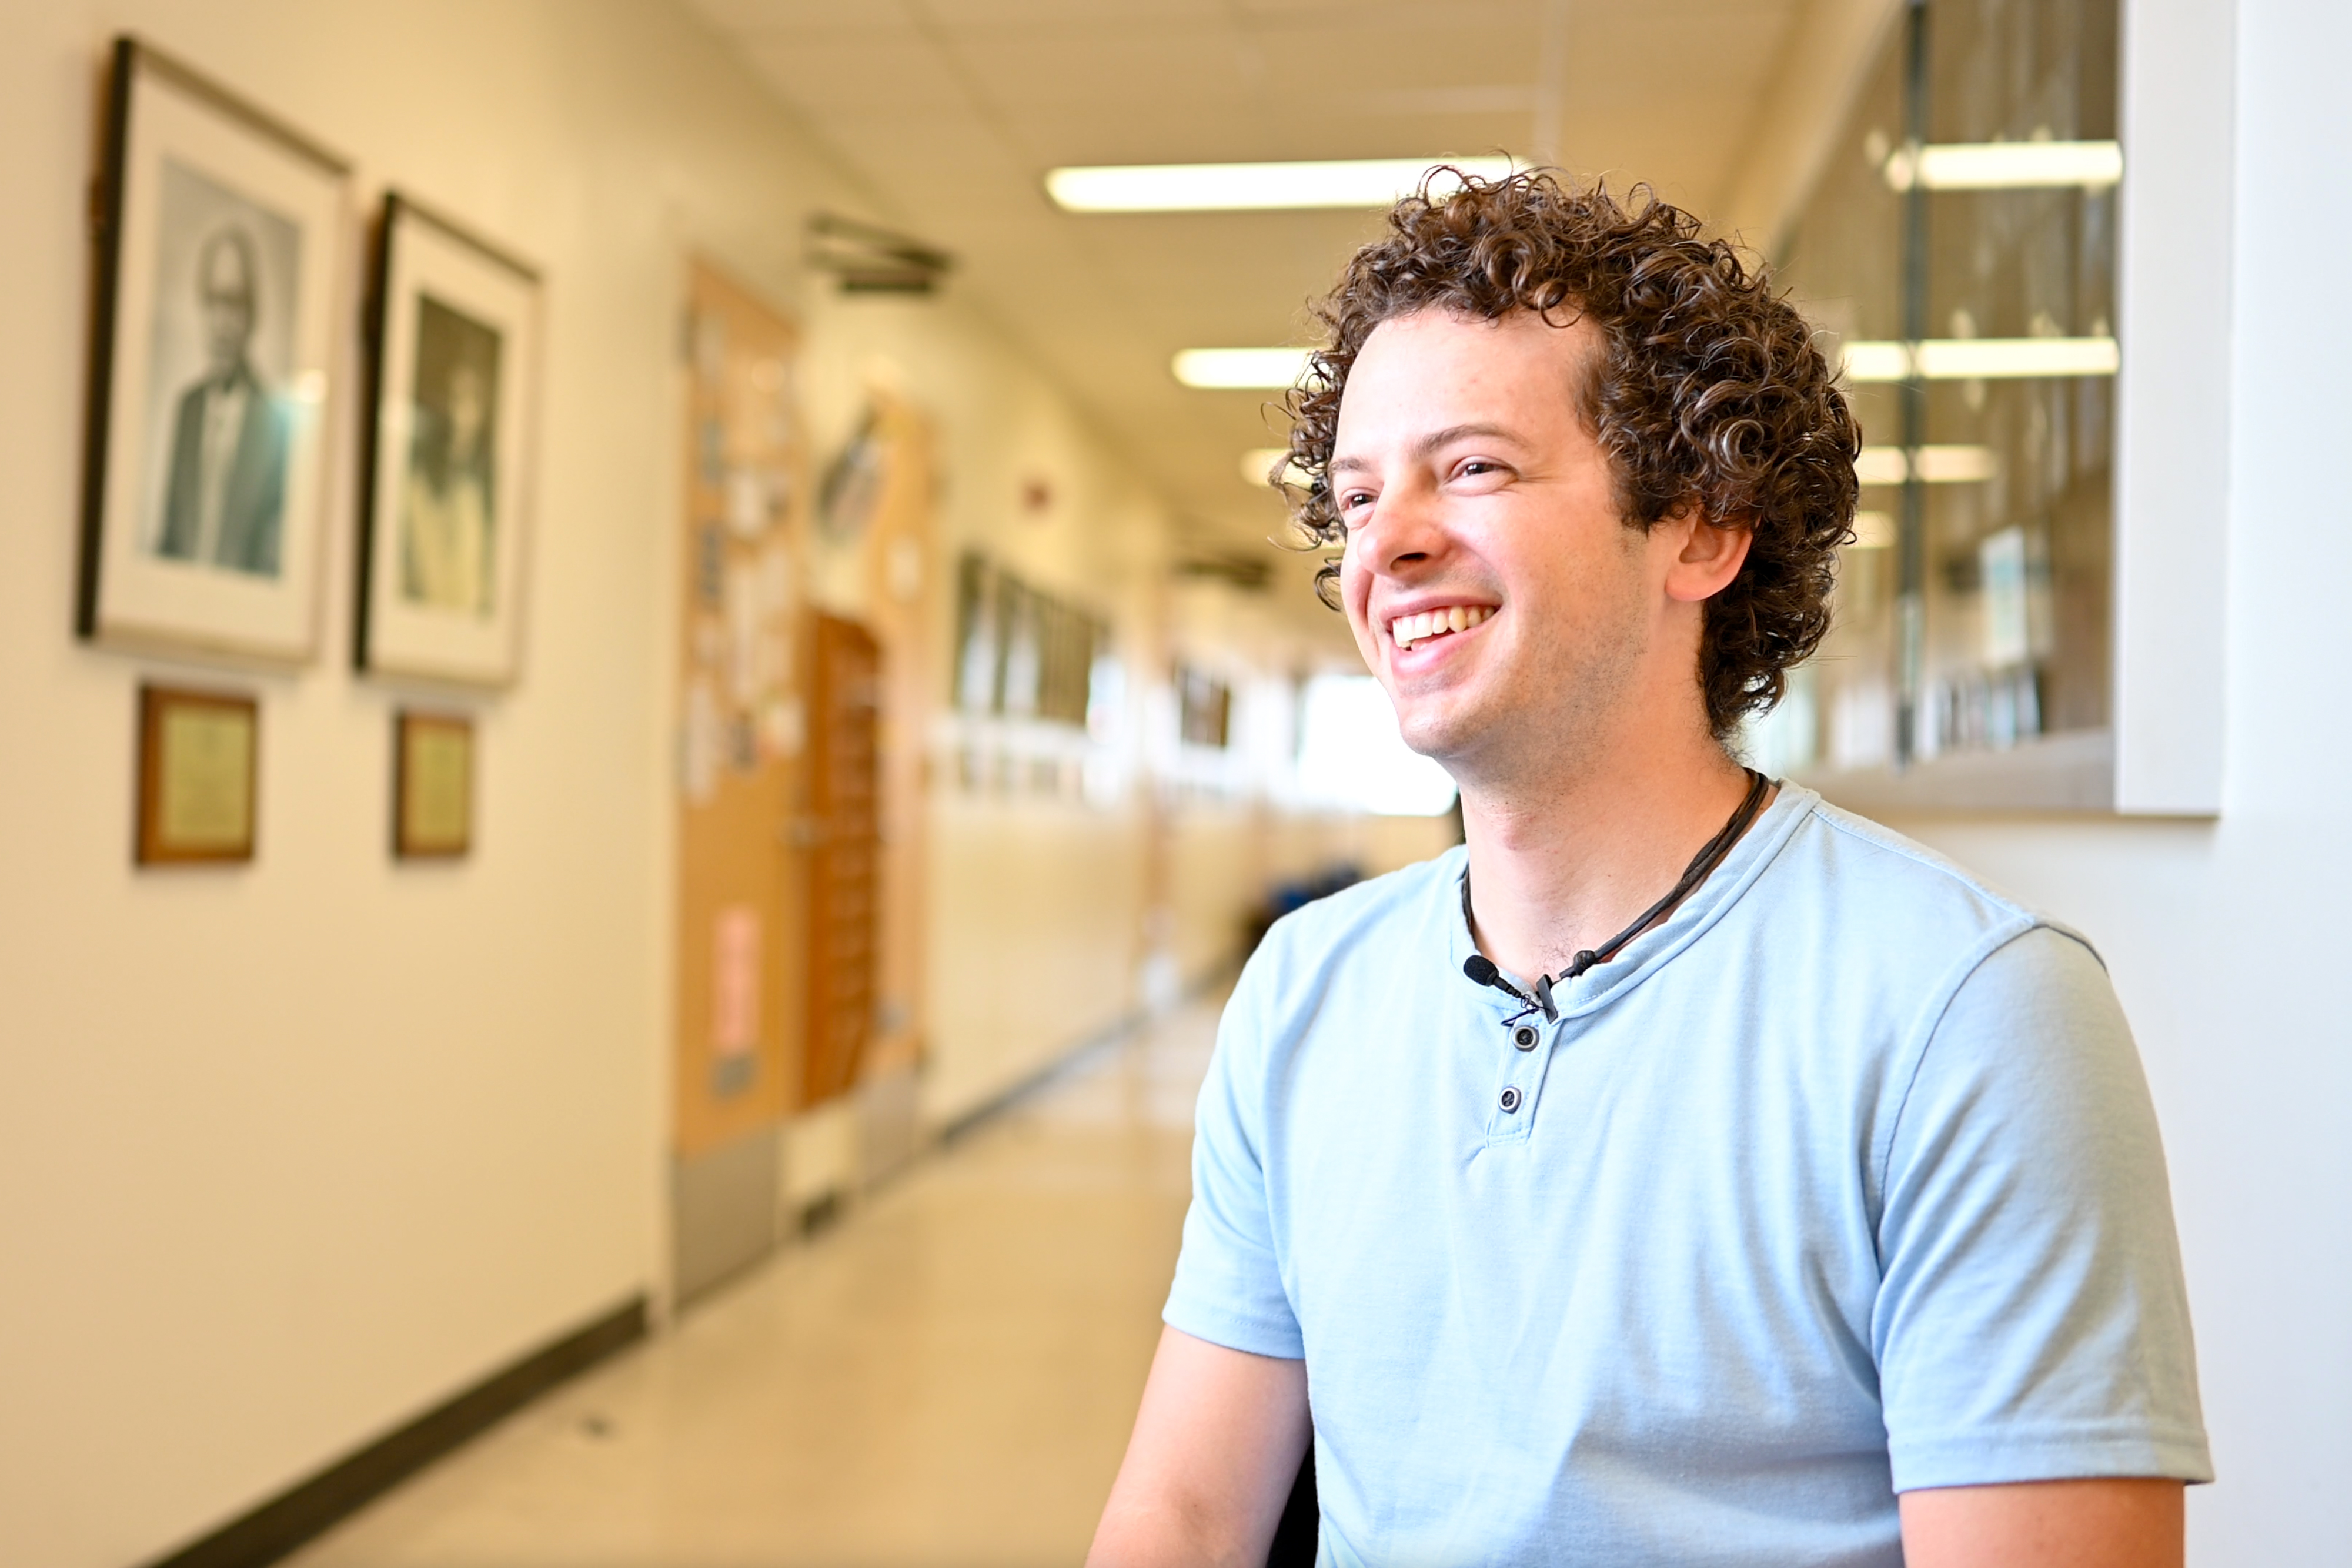 A smiling student with curly brown hair